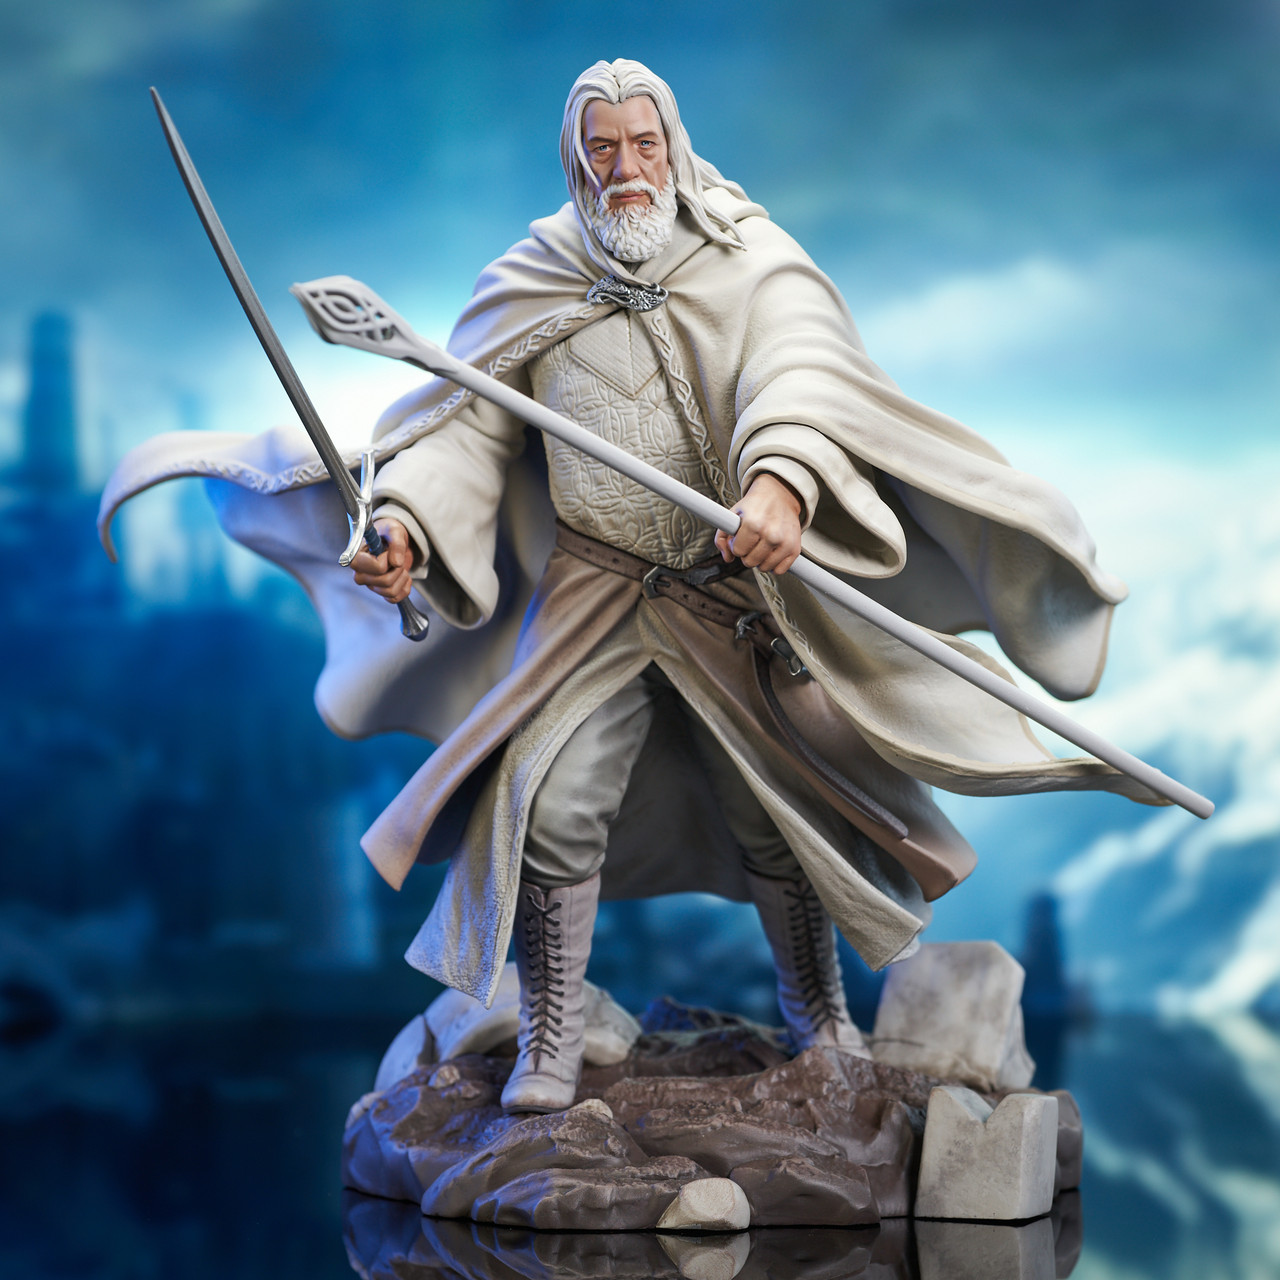 The Lord of the Rings from Fossil - World Collectors Net